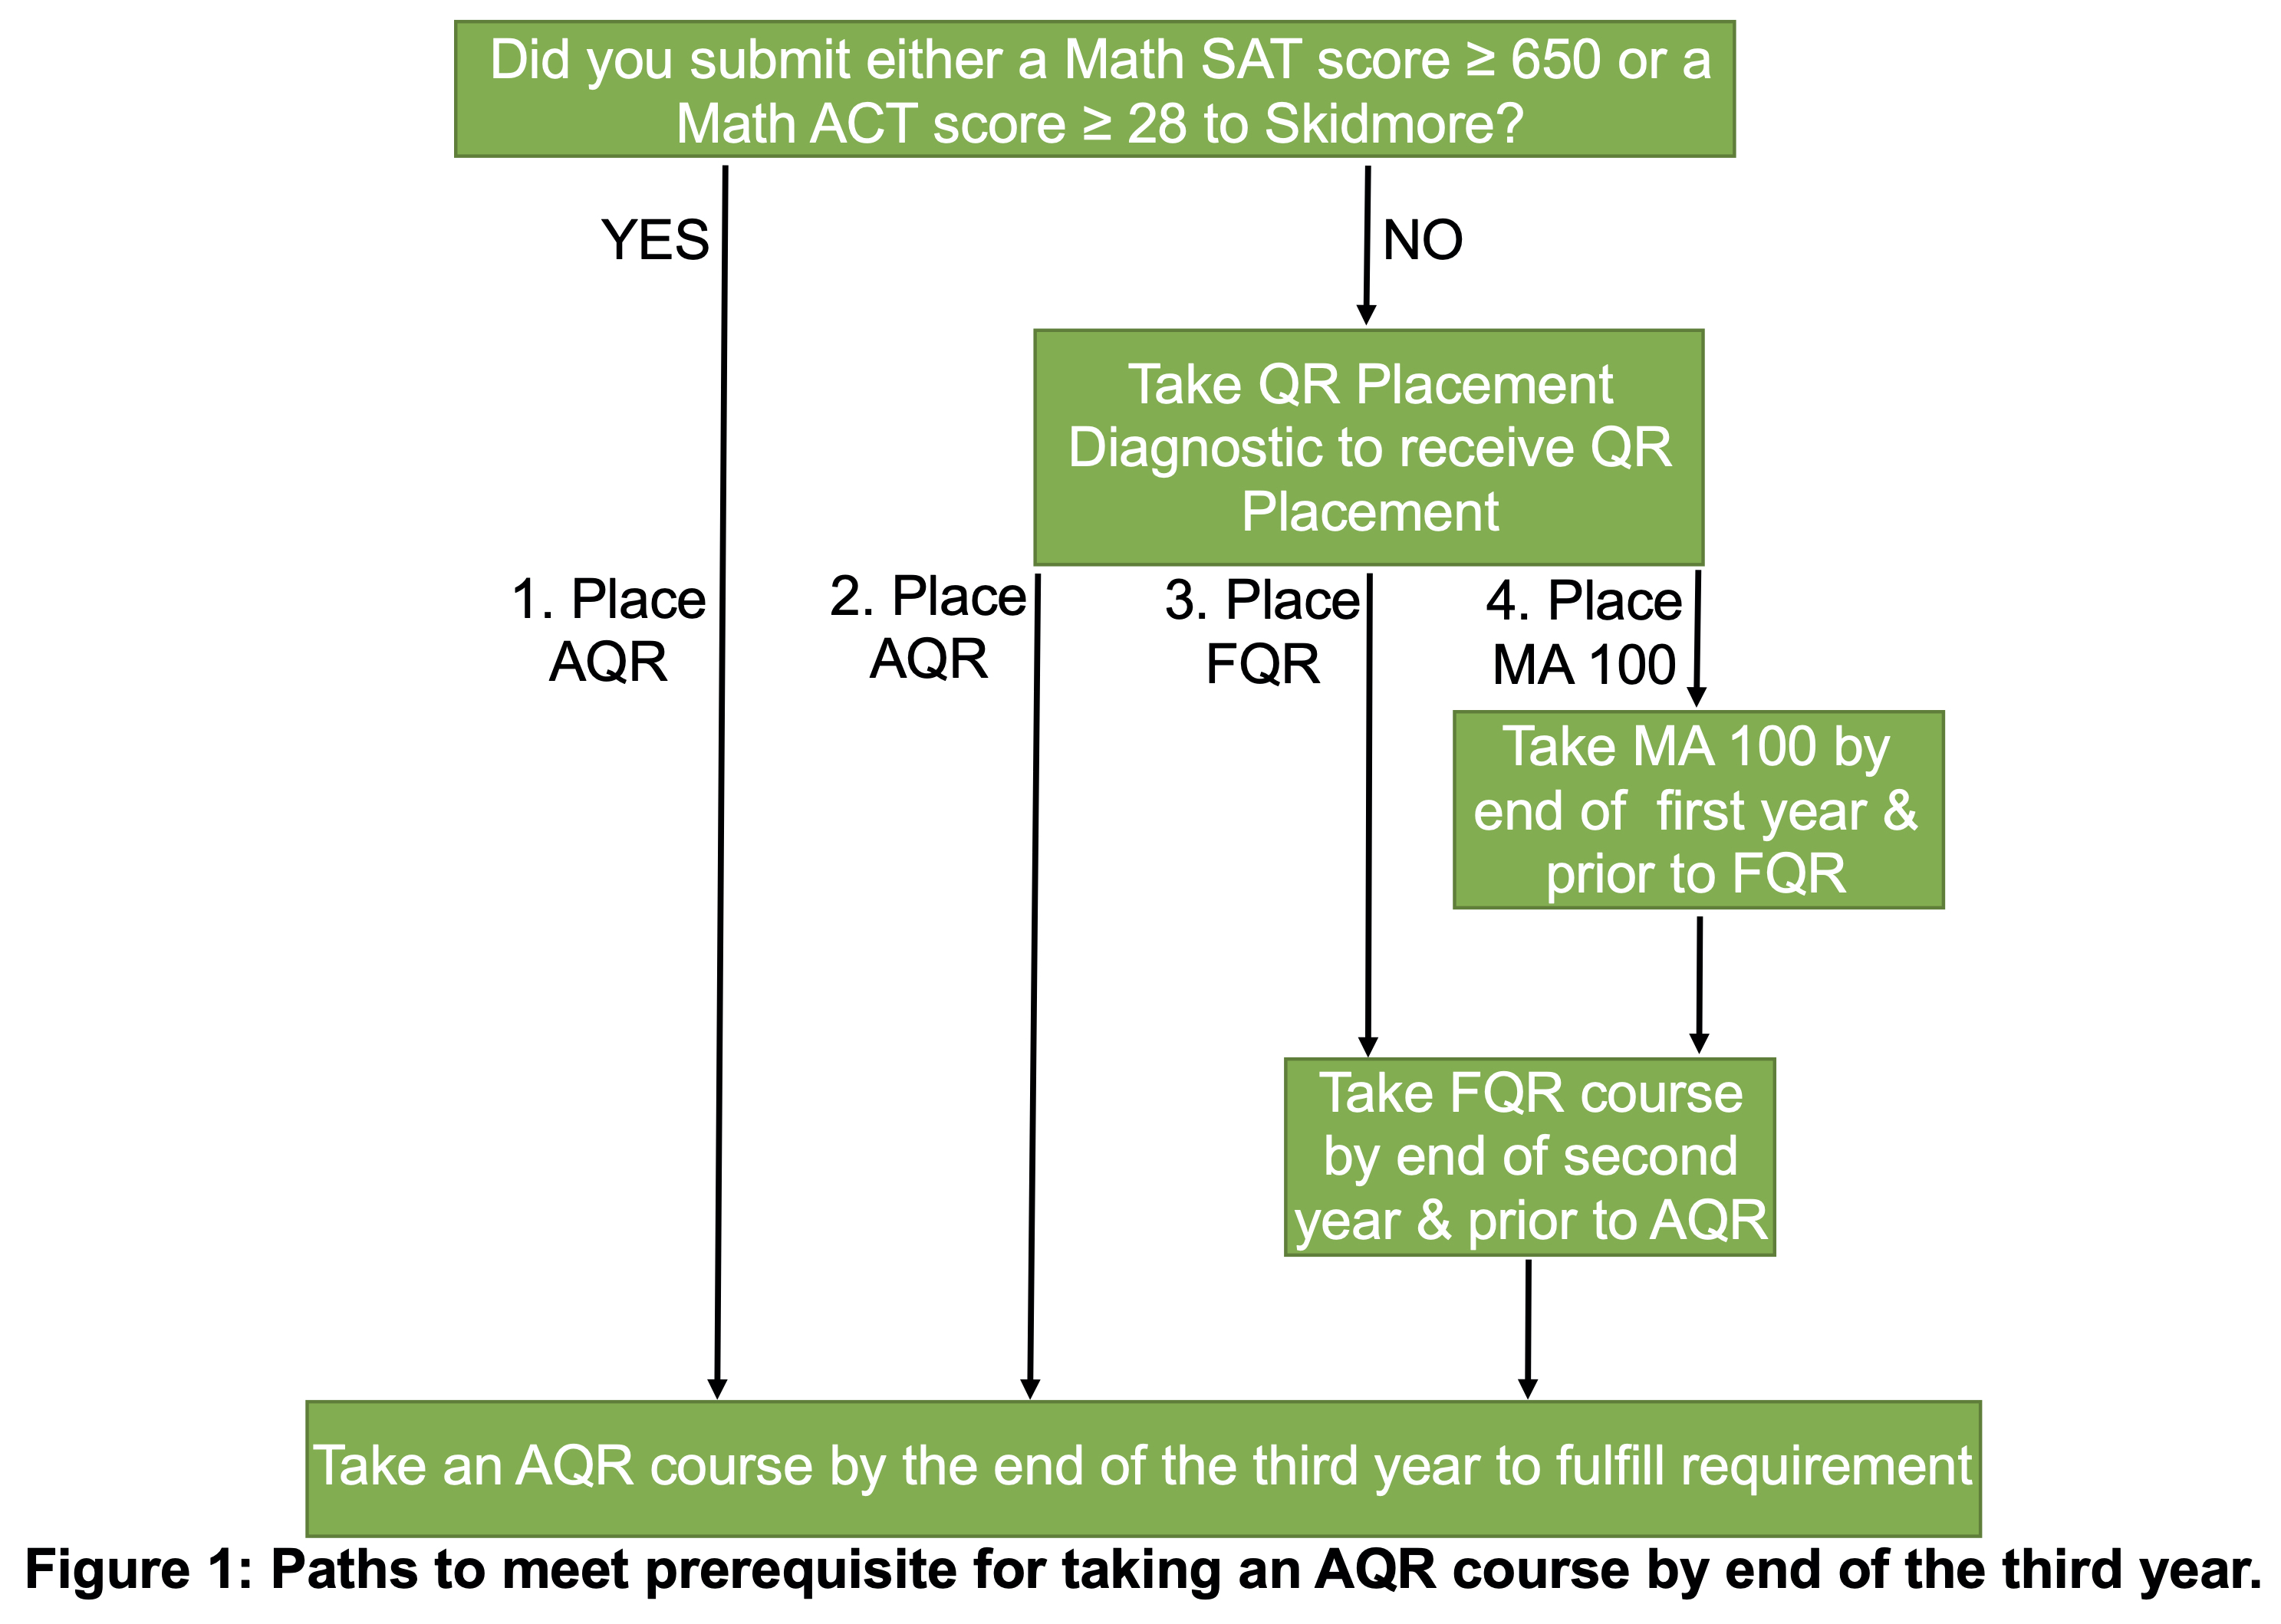 Four paths for QR placement. 1. Achieving a score of at least 650 on the SAT Mathematics (MSAT I) examination, a score of at least 570 on any Mathematics SAT II subject examination (MSAT II), or a score of at least 28 on the Mathematics ACT examination to place directly into an AQR course. ACT or SAT scores must be officially submitted to the College. Please note, listing your scores on your Common Application without having them officially sent to Skidmore does not count. If you have the relevant standardized test score, but did not offically submit your scores to Skidmore, please go to your College Board or ACT account, take a screenshot of the summary page (or print page to PDF) that shows your full name, date of birth, and all of your scores including test dates, and then email that screenshot (or PDF) to registrar@skidmore.edu.  Taking the online QR Placement Diagnostic and placing directly into an AQR course. Incoming students who do not submit ACT or SAT scores or whose scores do not place them into an AQR course must take the online QR Placement Diagnostic. Taking the online QR Placement Diagnostic and placing into a Foundational QR course (FQR course). Students who place into an FQR course must successfully complete it by the end of their second year. These courses, which are offered by a variety of departments, emphasize the application of mathematical calculations and concepts to daily life. Taking the online QR Placement Diagnostic and placing into MA 100 (Quantitative Reasoning). This course, which emphasizes basic quantitative reasoning skills in mathematics and statistics, is required for all students who do not place into an FQR or AQR course and must be successfully completed by the end of their first year. Students must then take and successfully complete an FQR course (as described above) by the end of their second year.